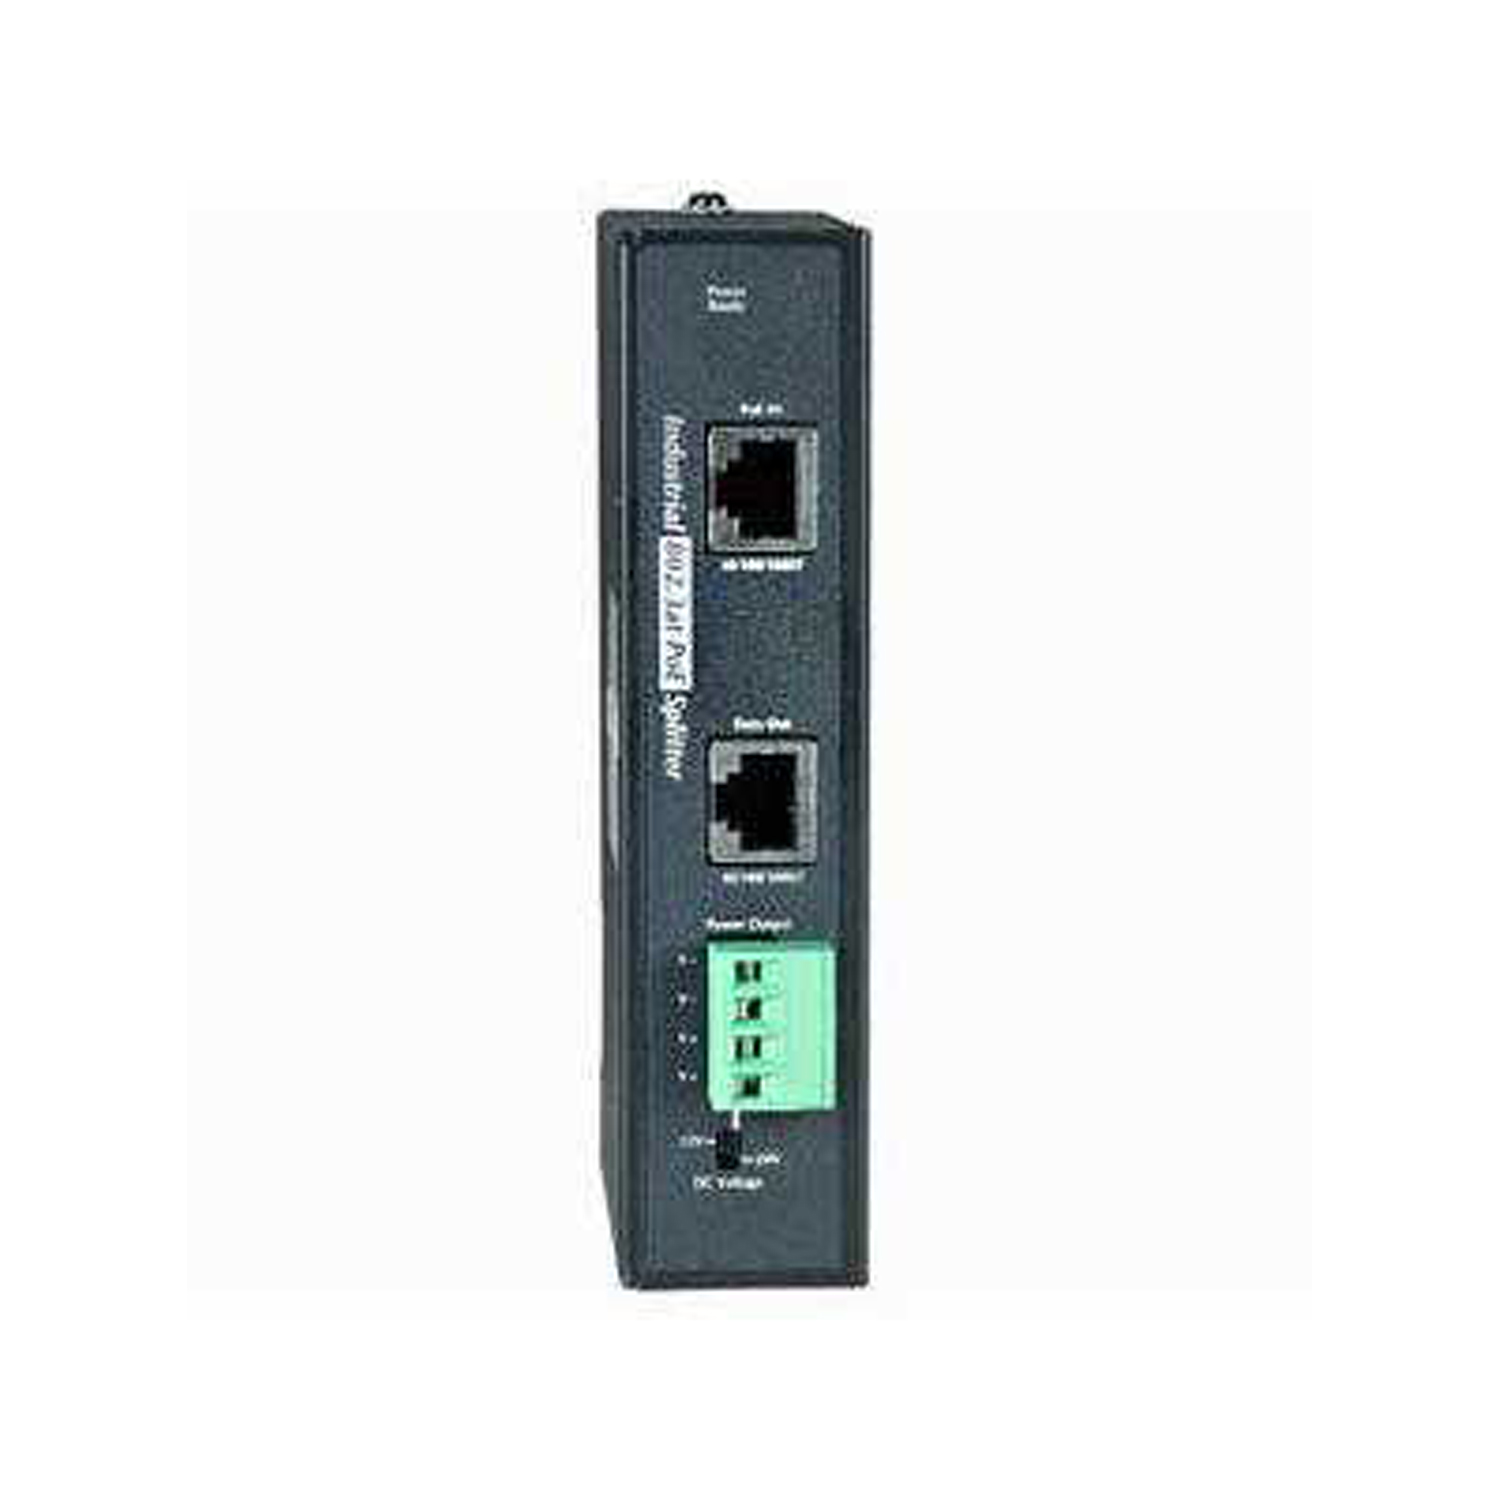 NTI E-POE-IND Industrial Power Over Ethernet Adapter